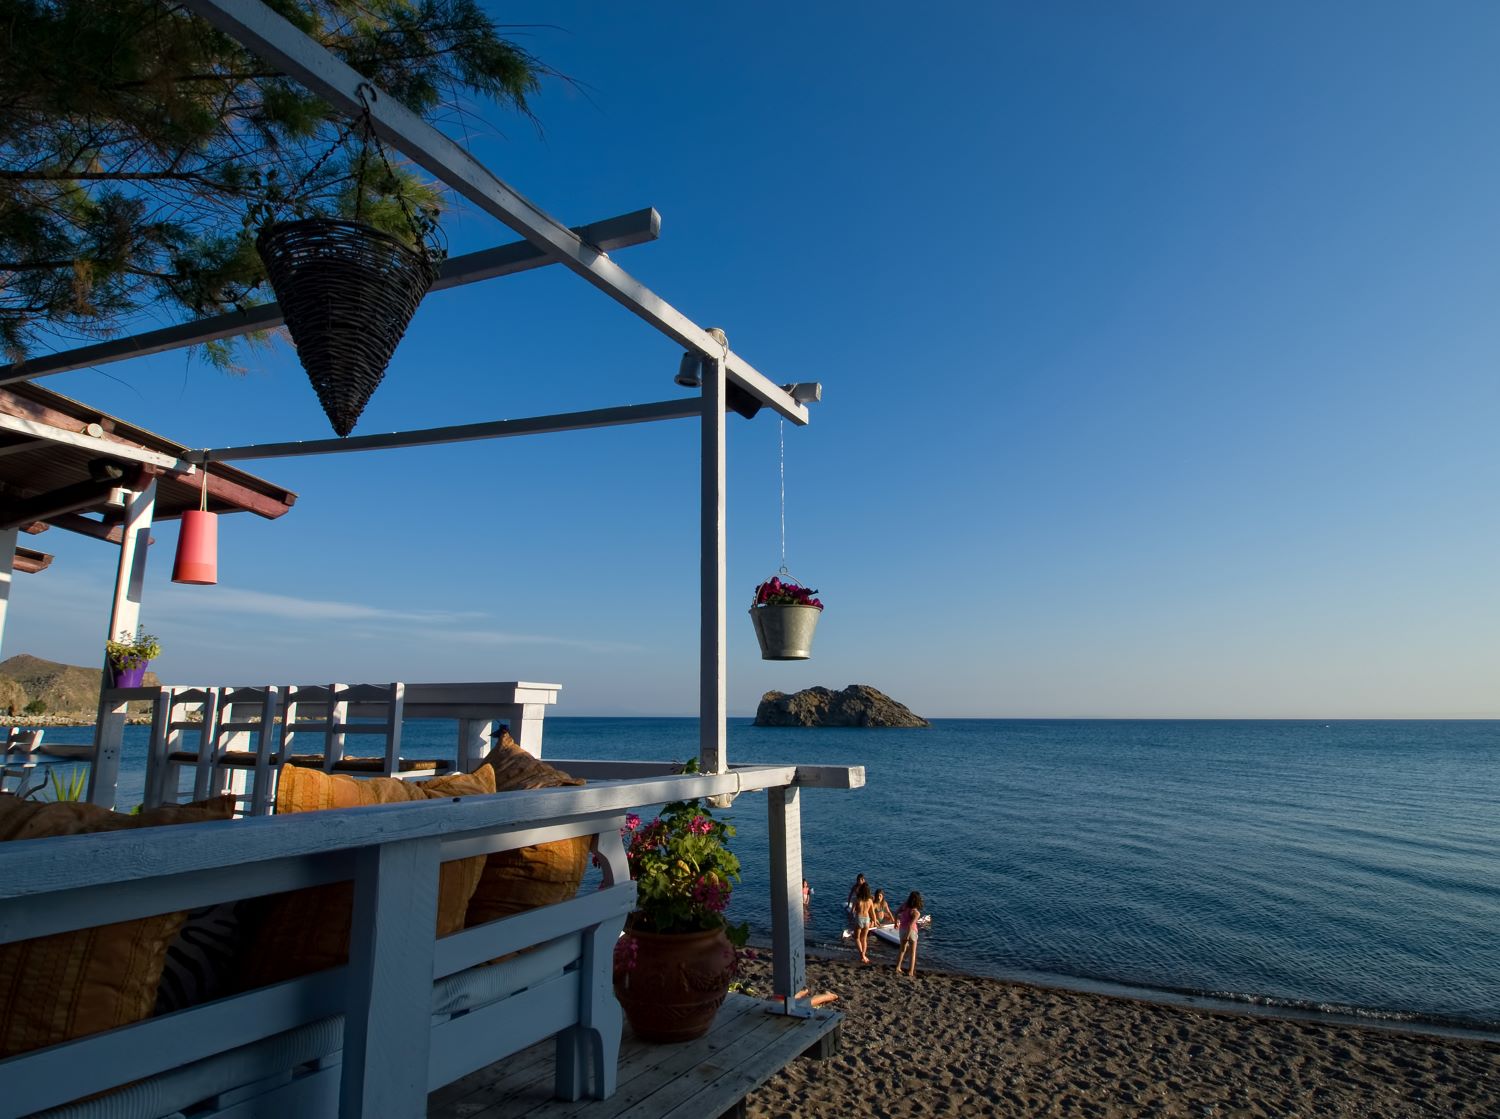 Top tips for getting the best out of your holiday to Lesvos